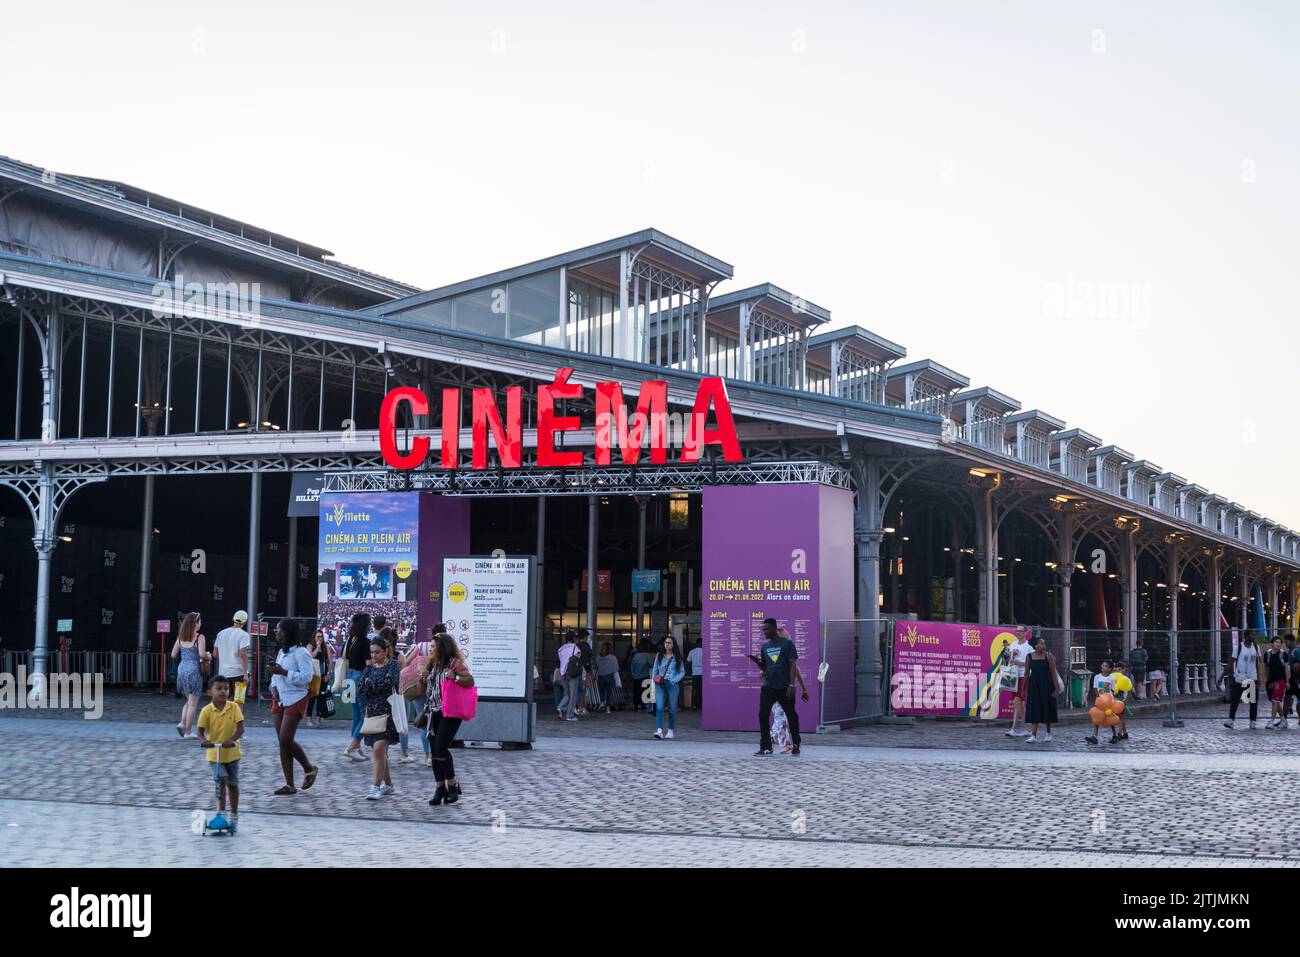 The Grande halle de la Villette, site of fairs and cultural events and Open-air cinema in the summer in the Parc de la Villette, Paris, France Stock Photo